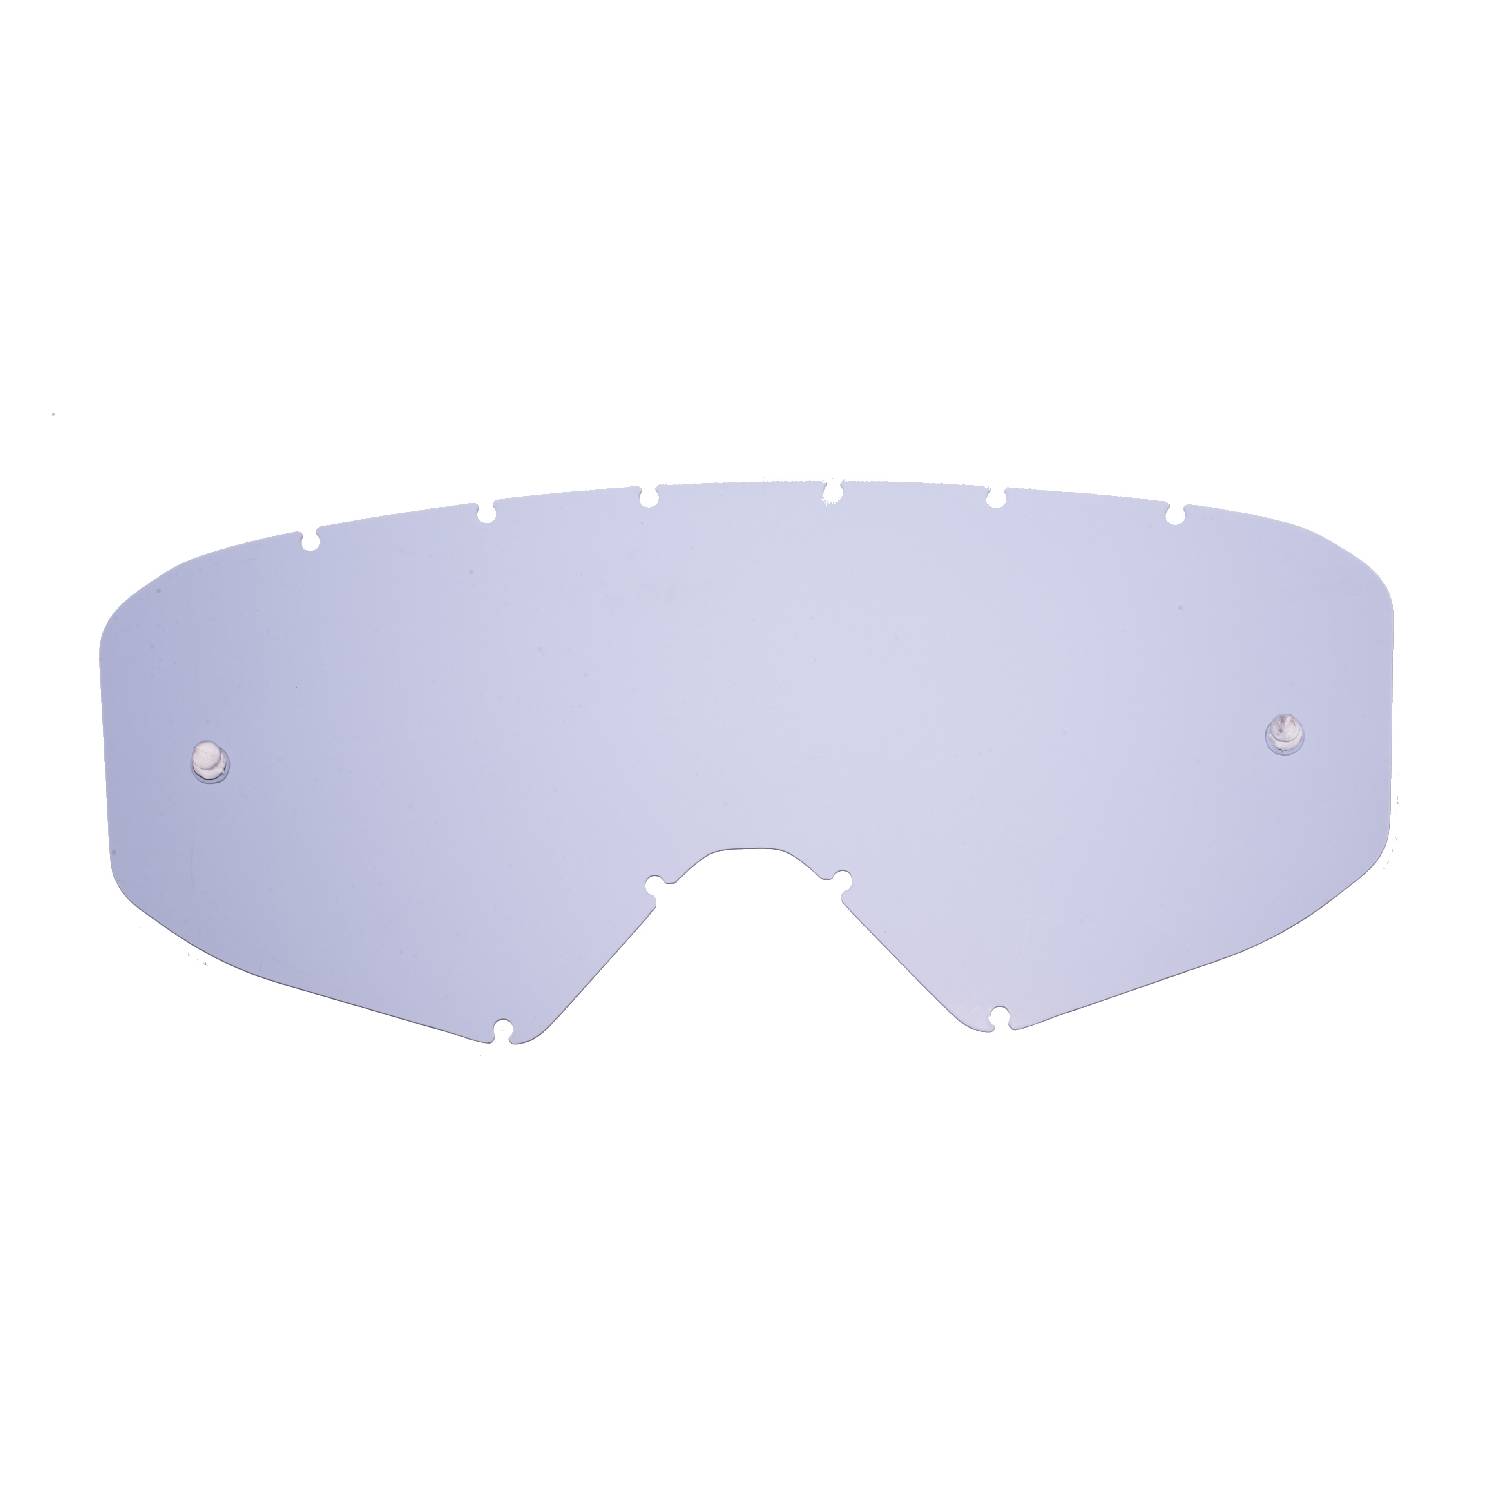 Smoked replacement lens compatible for Ethen Zerocinque Primis / R / Ares / Ares Pluma cross goggles / goggles